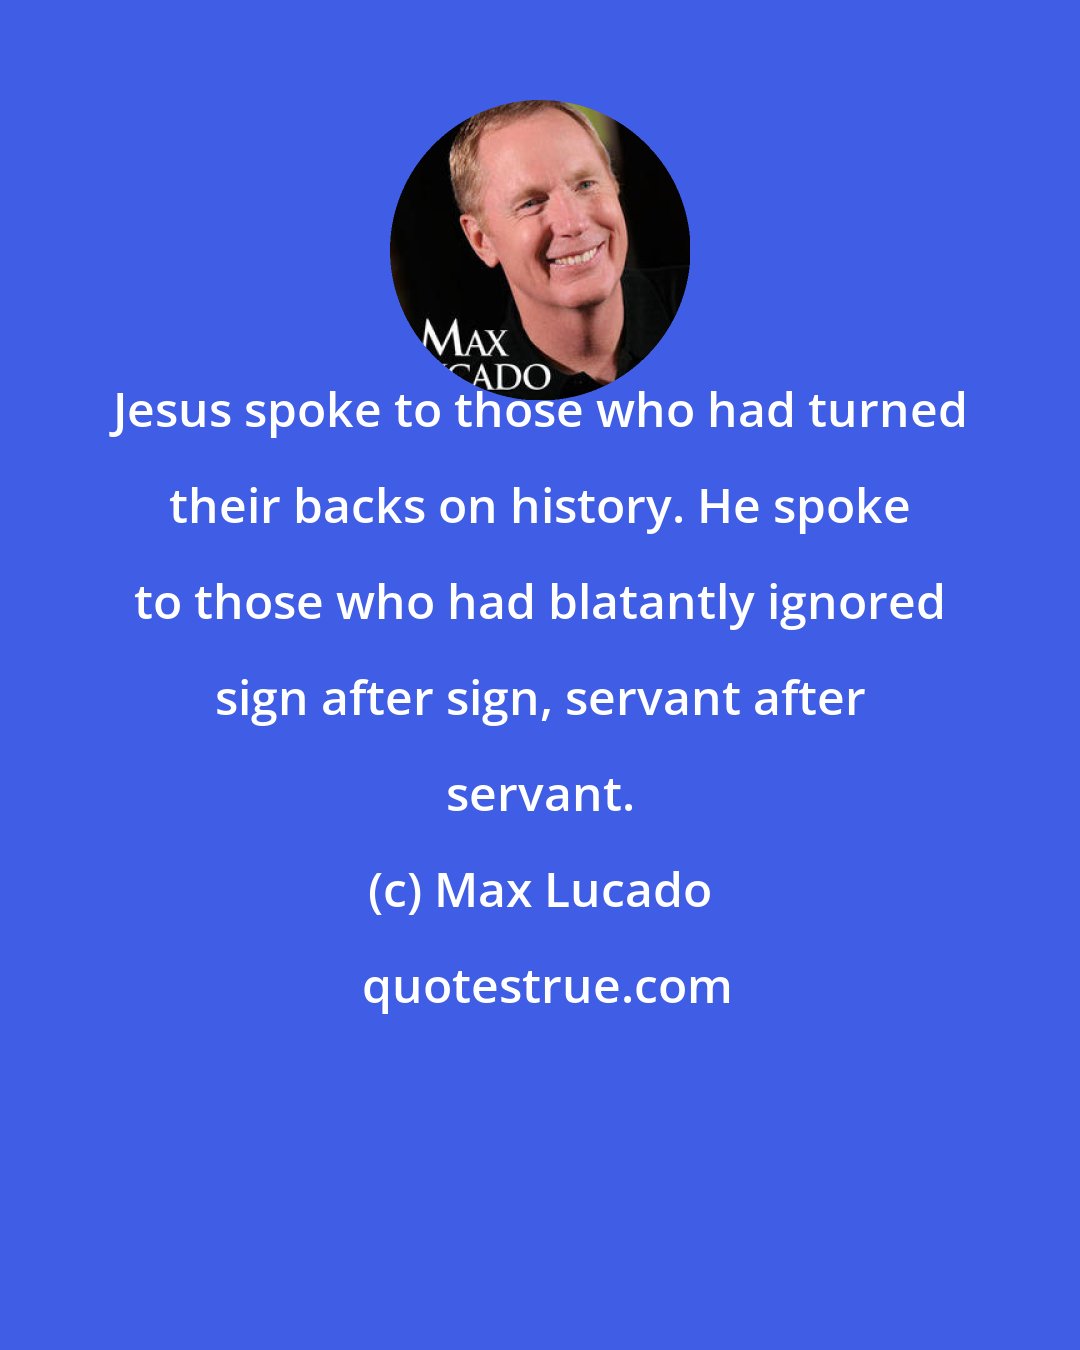 Max Lucado: Jesus spoke to those who had turned their backs on history. He spoke to those who had blatantly ignored sign after sign, servant after servant.